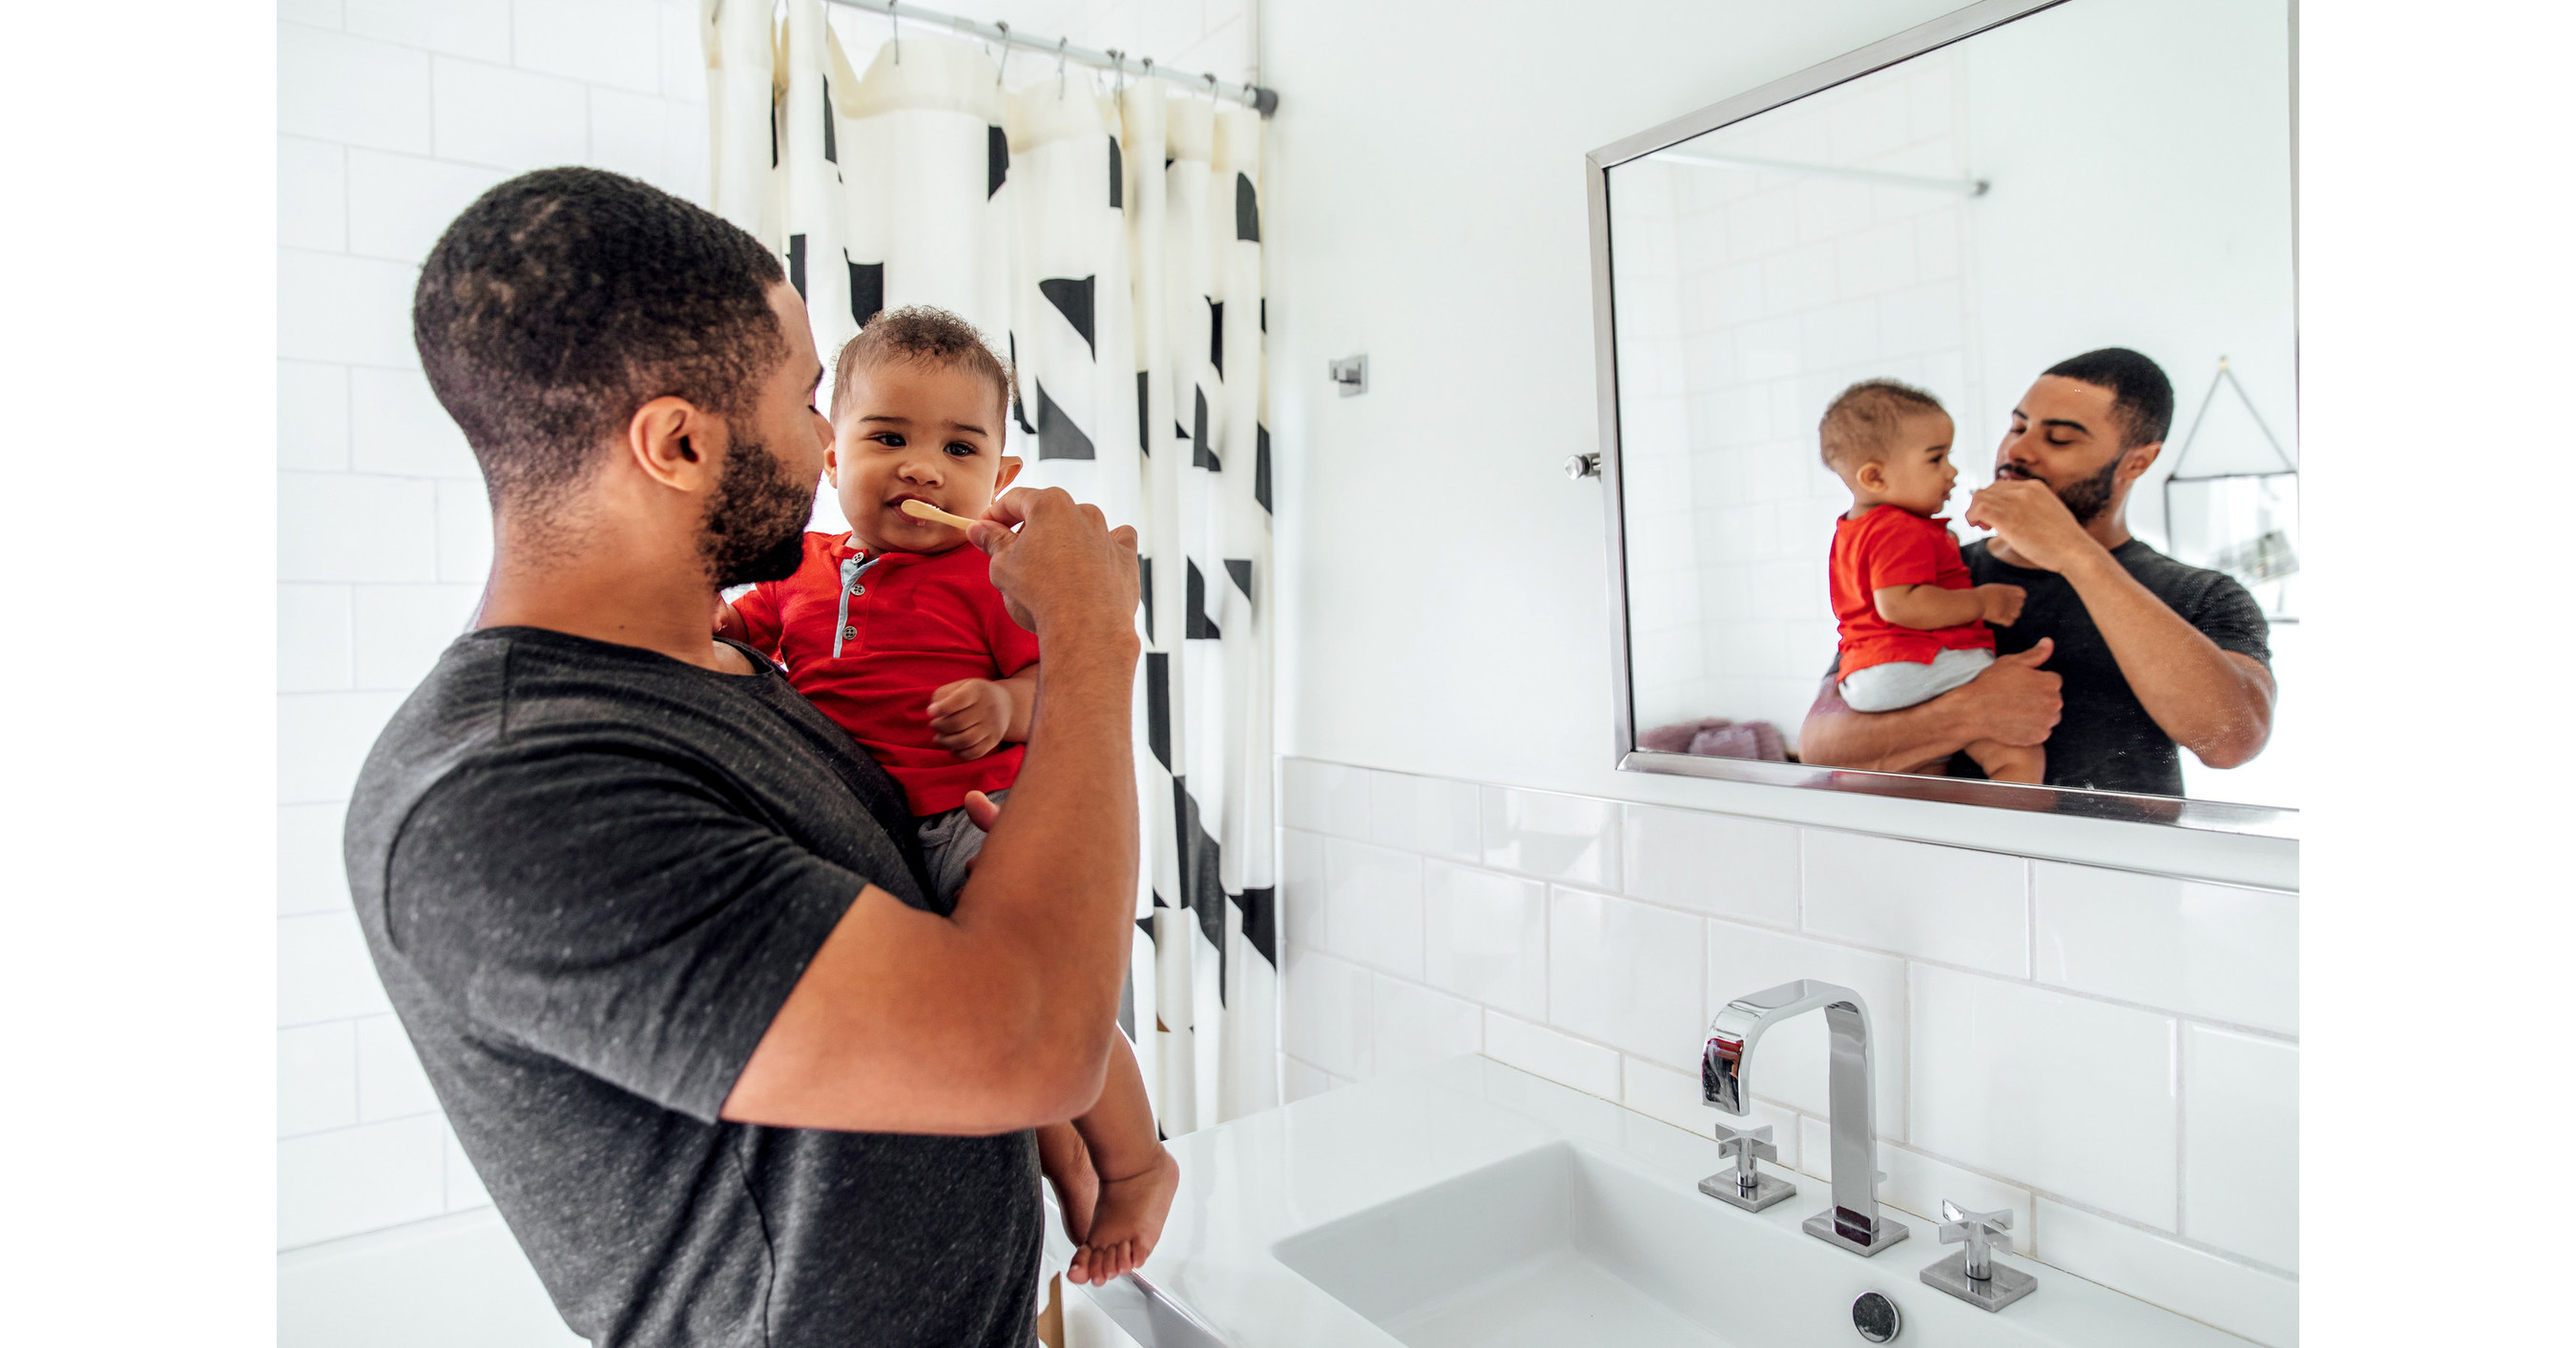 Adults, children make oral care a priority according to Delta Dental survey